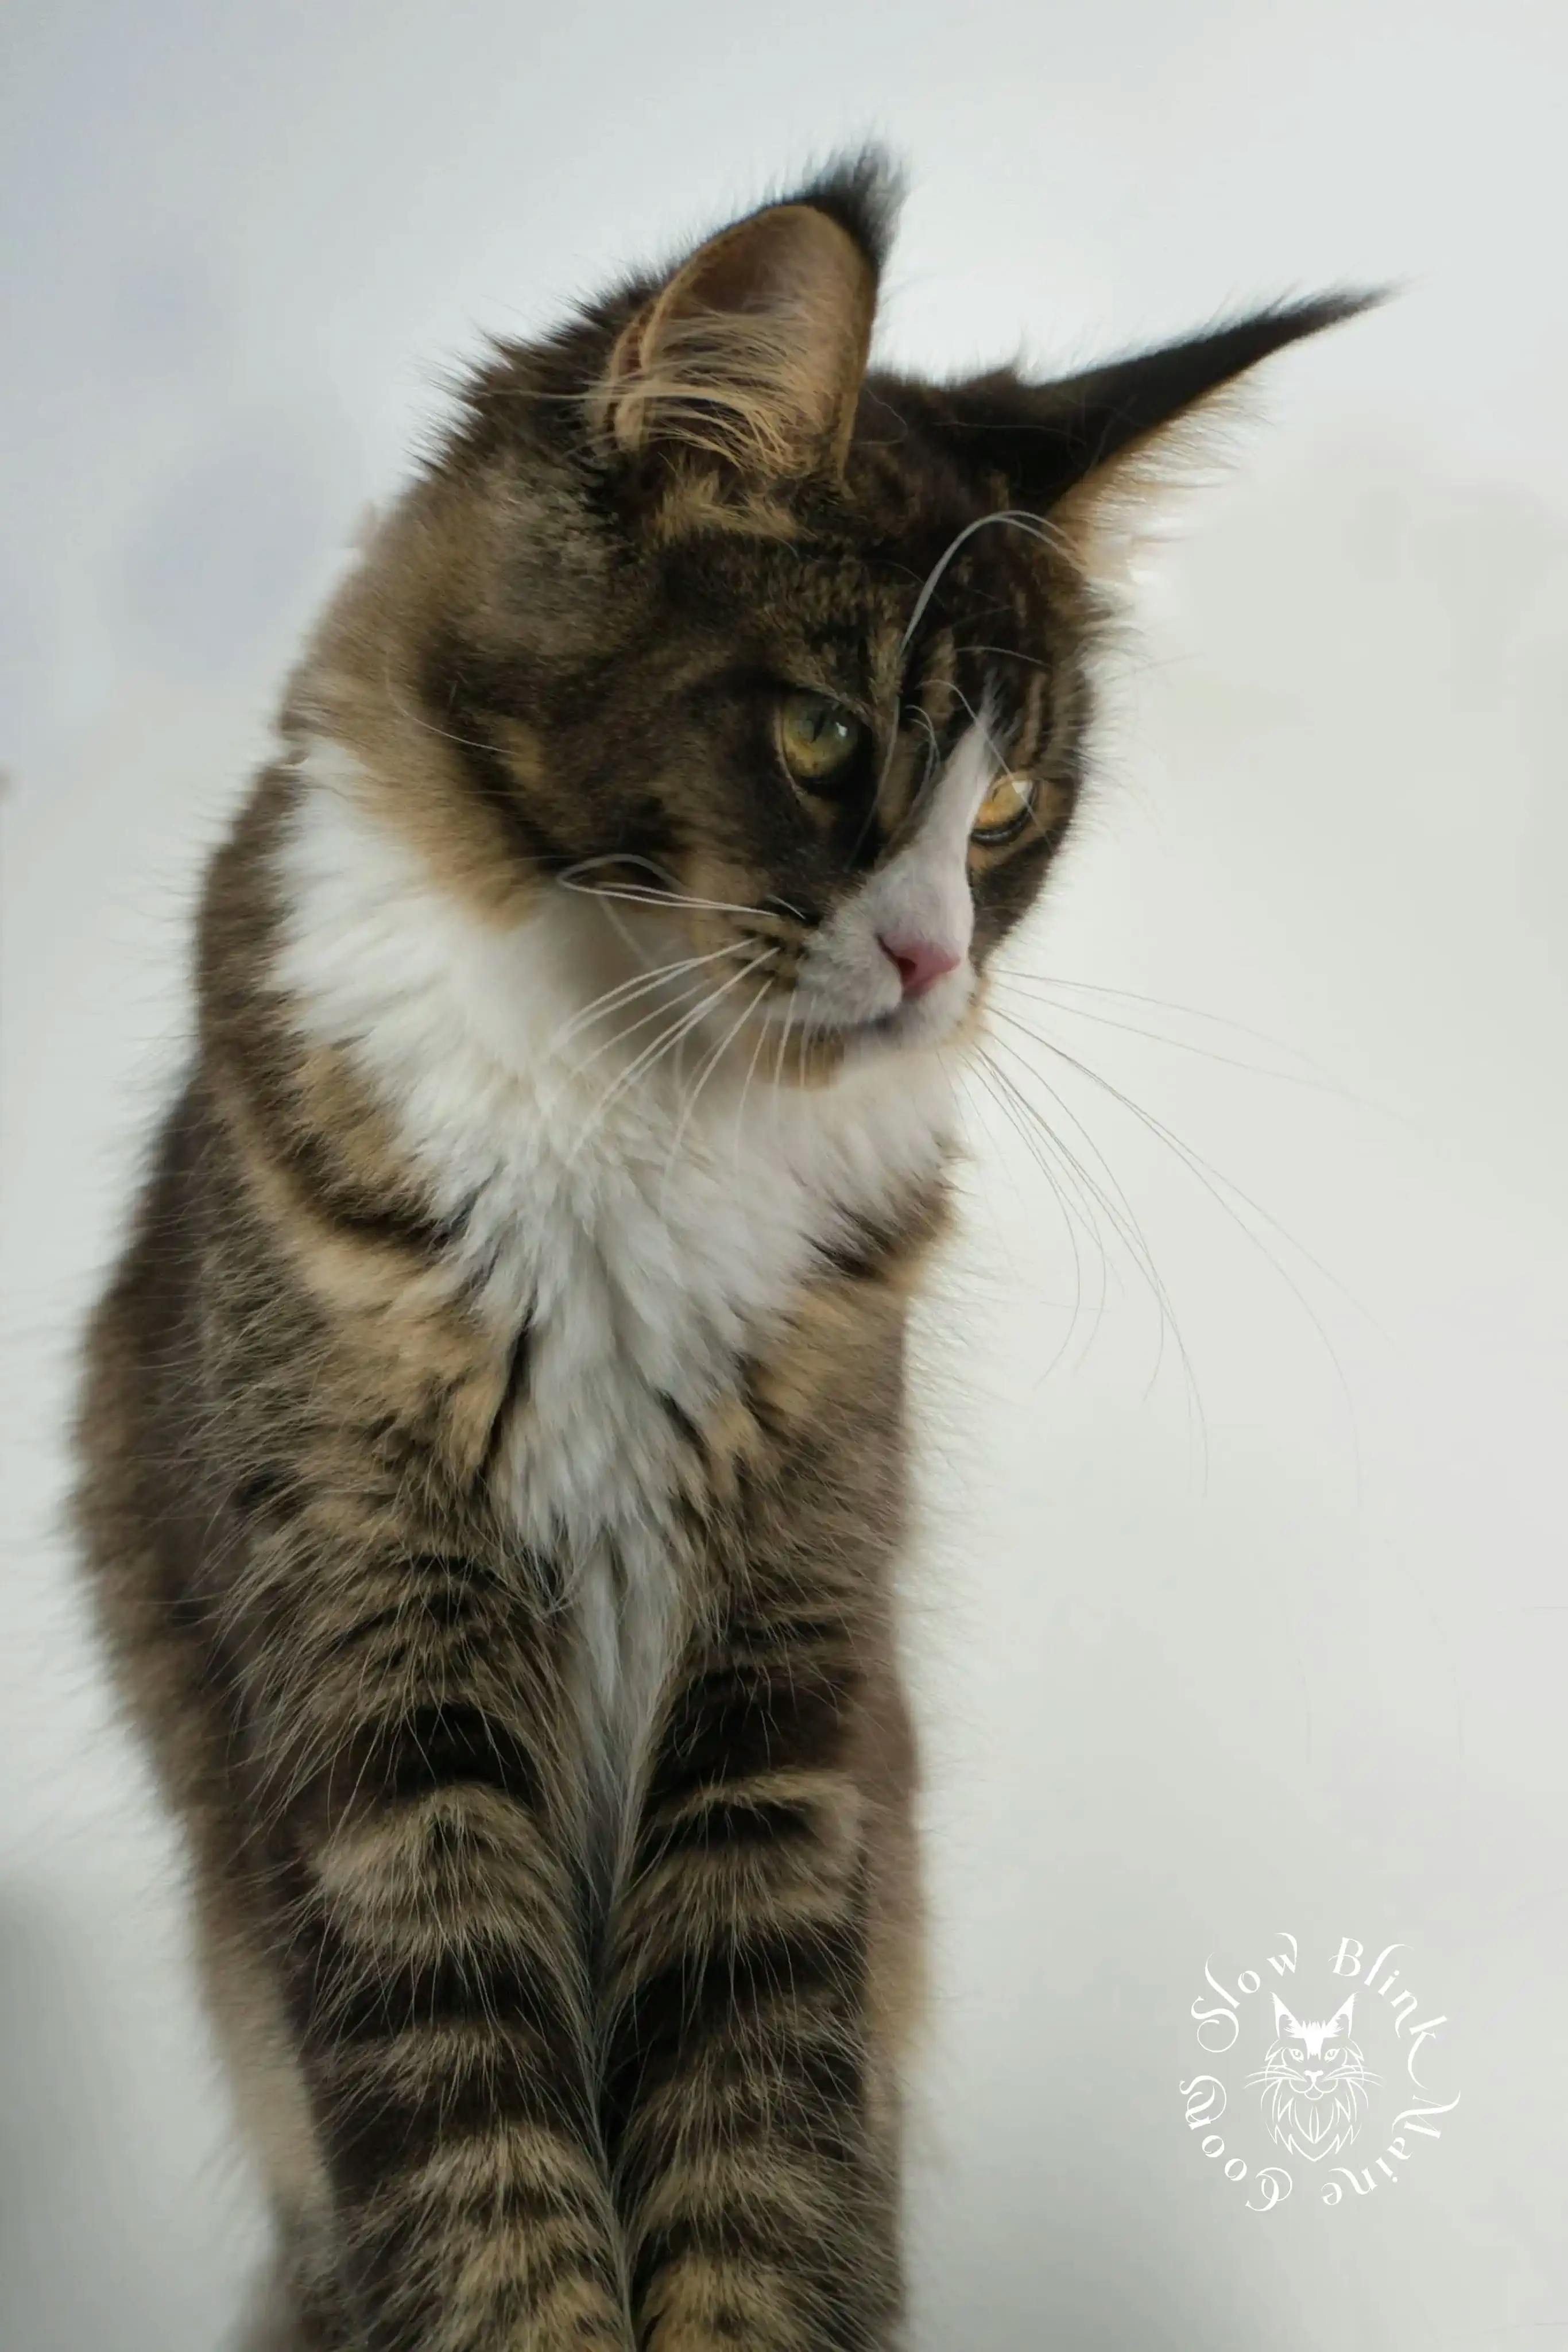 Adult Maine Coon Cat from SlowBlinkMaineCoons > calypso blaze | black ticked tabby bicolor | maine coon | ems code n 25 03 | 6 months old | 1